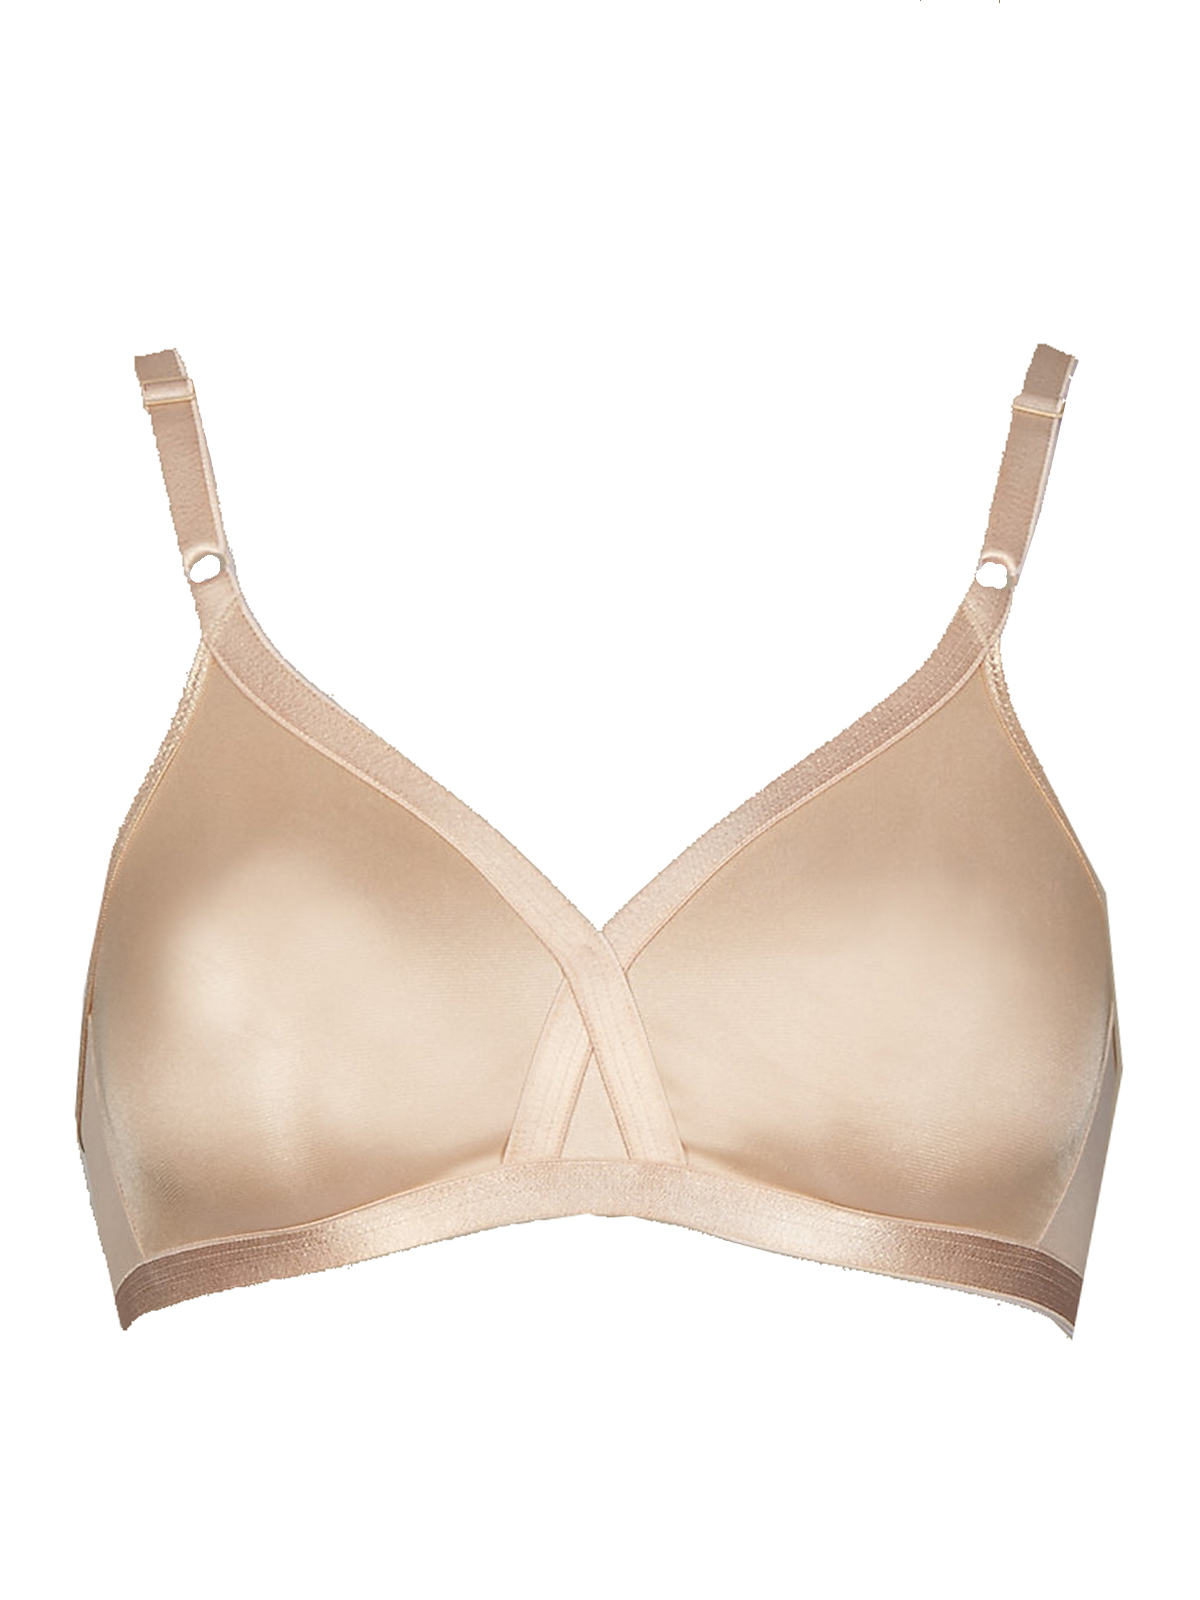 Marks And Spencer Mand5 Almond Non Wired Crossover Full Cup Bra Size 32 To 40 A B C D Dd